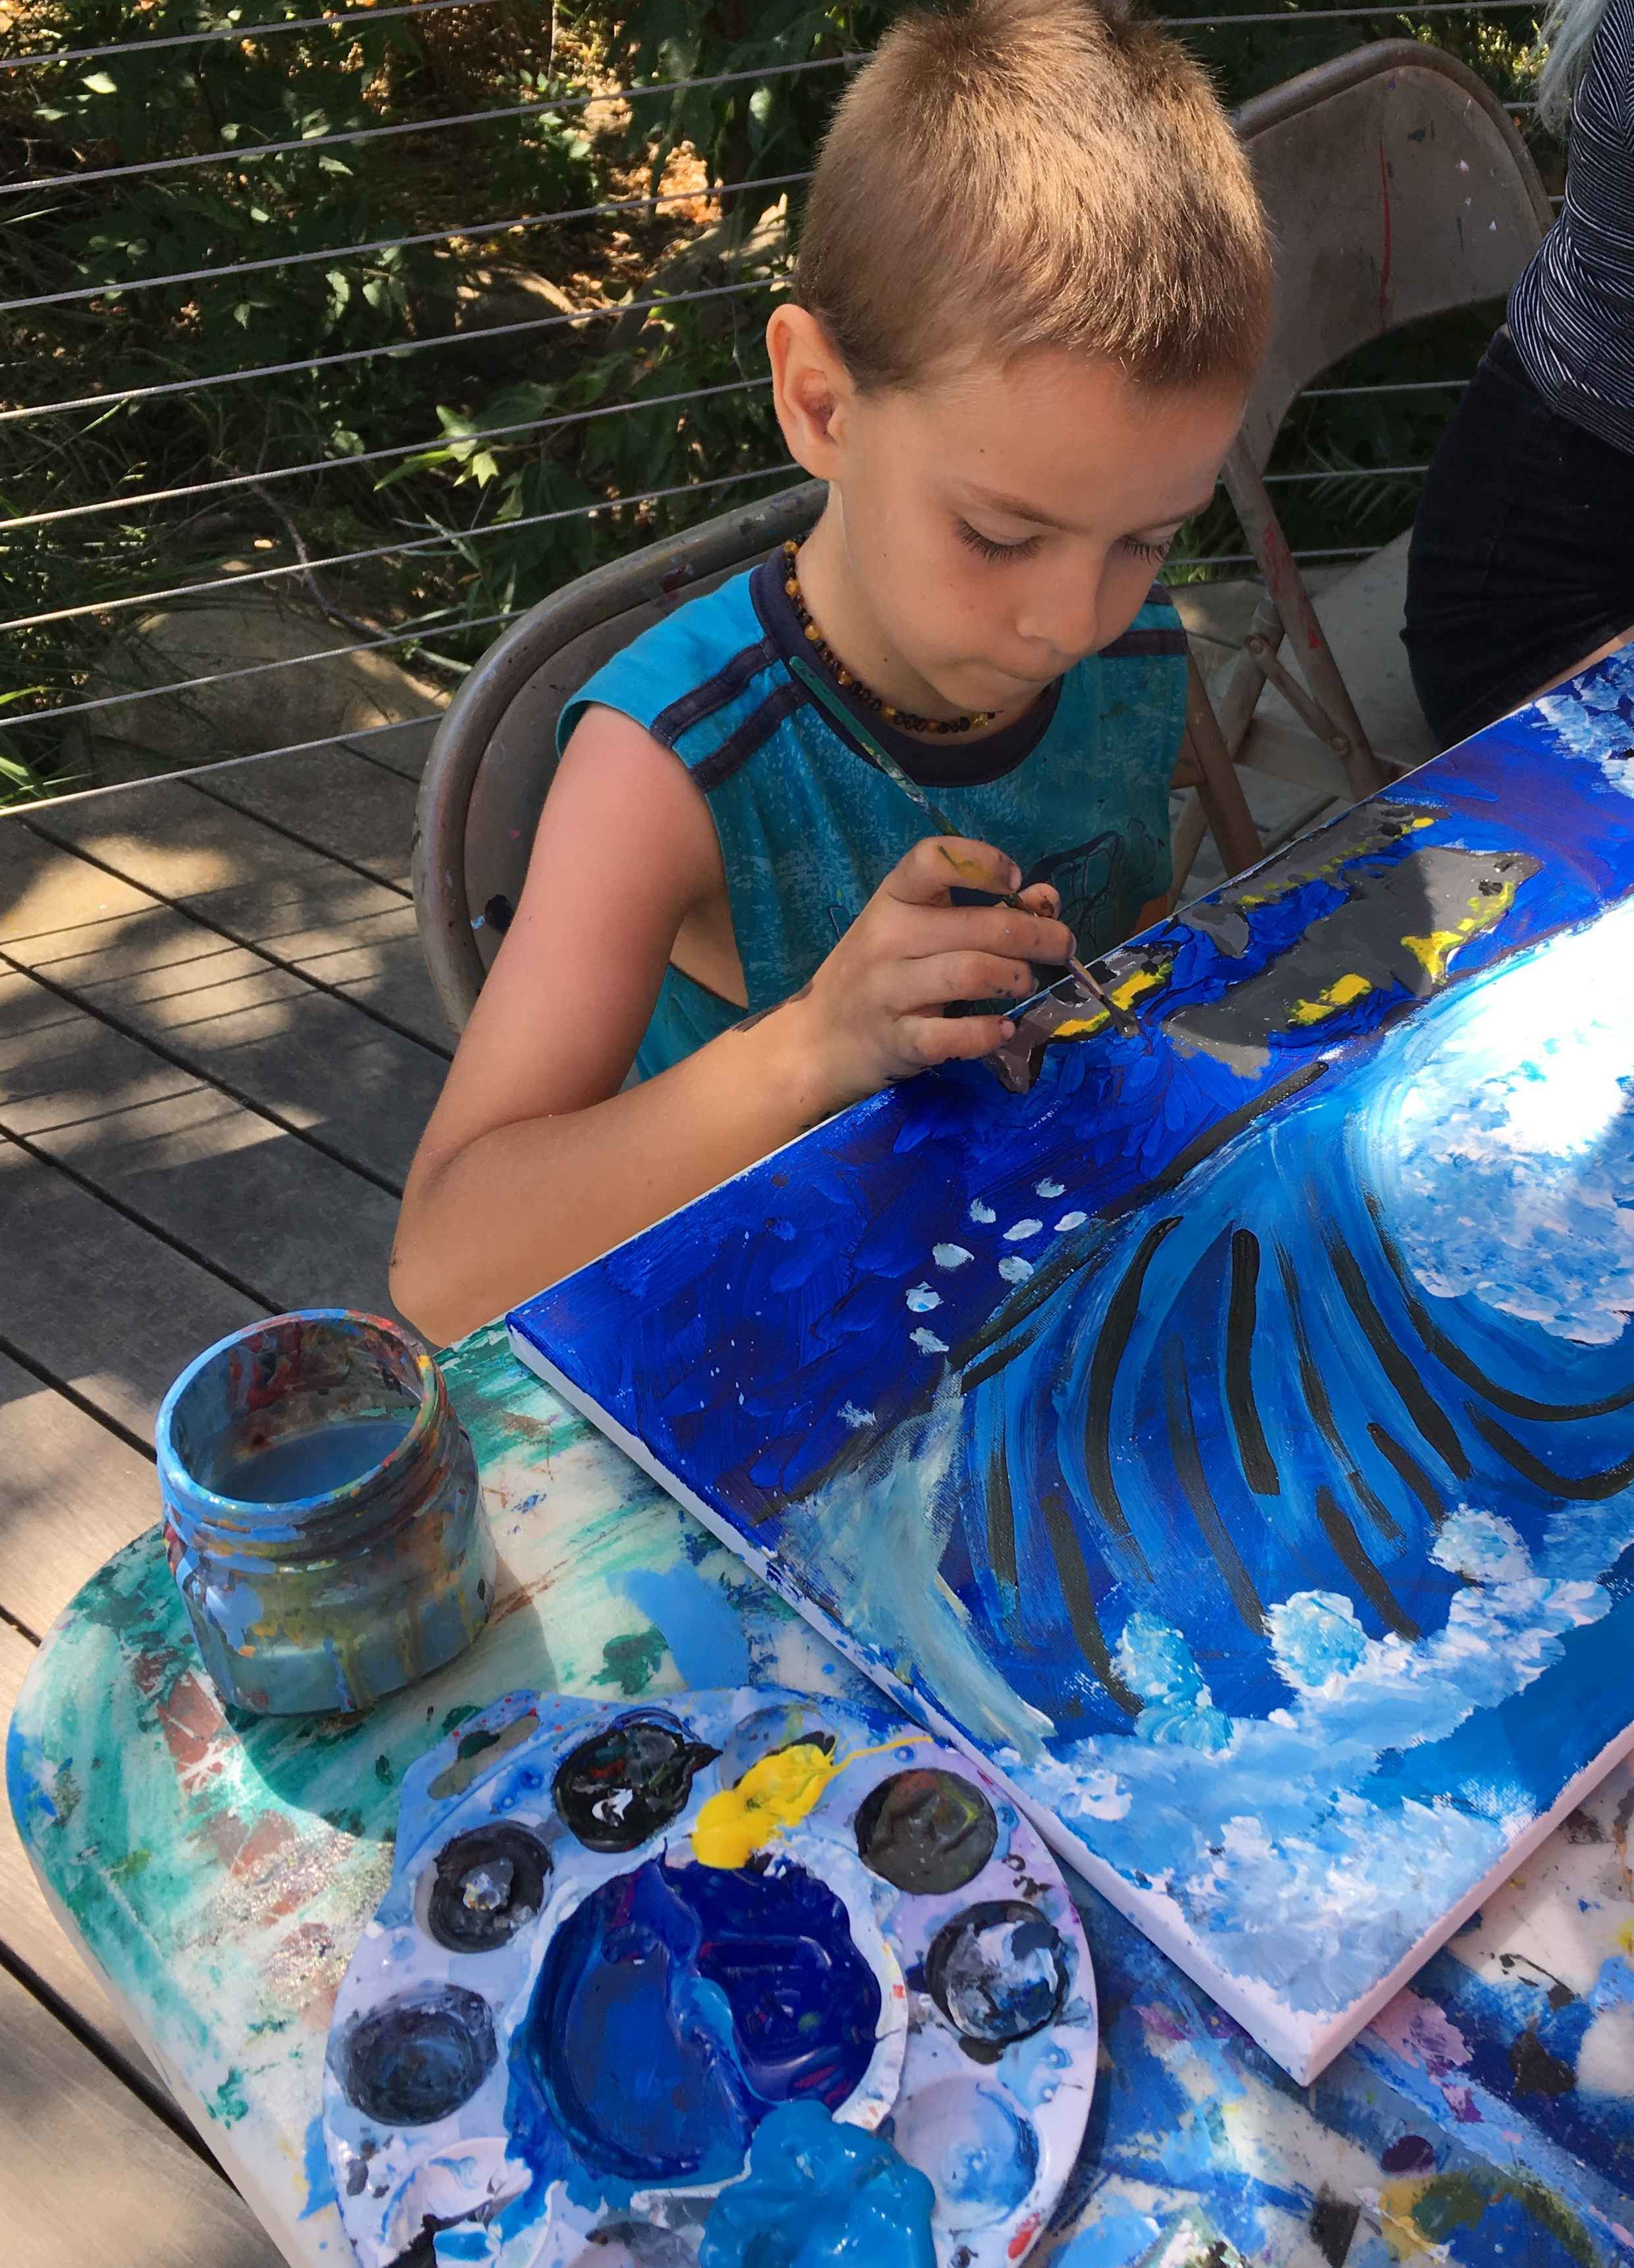 Top Eight Tips for Teaching Art to Children